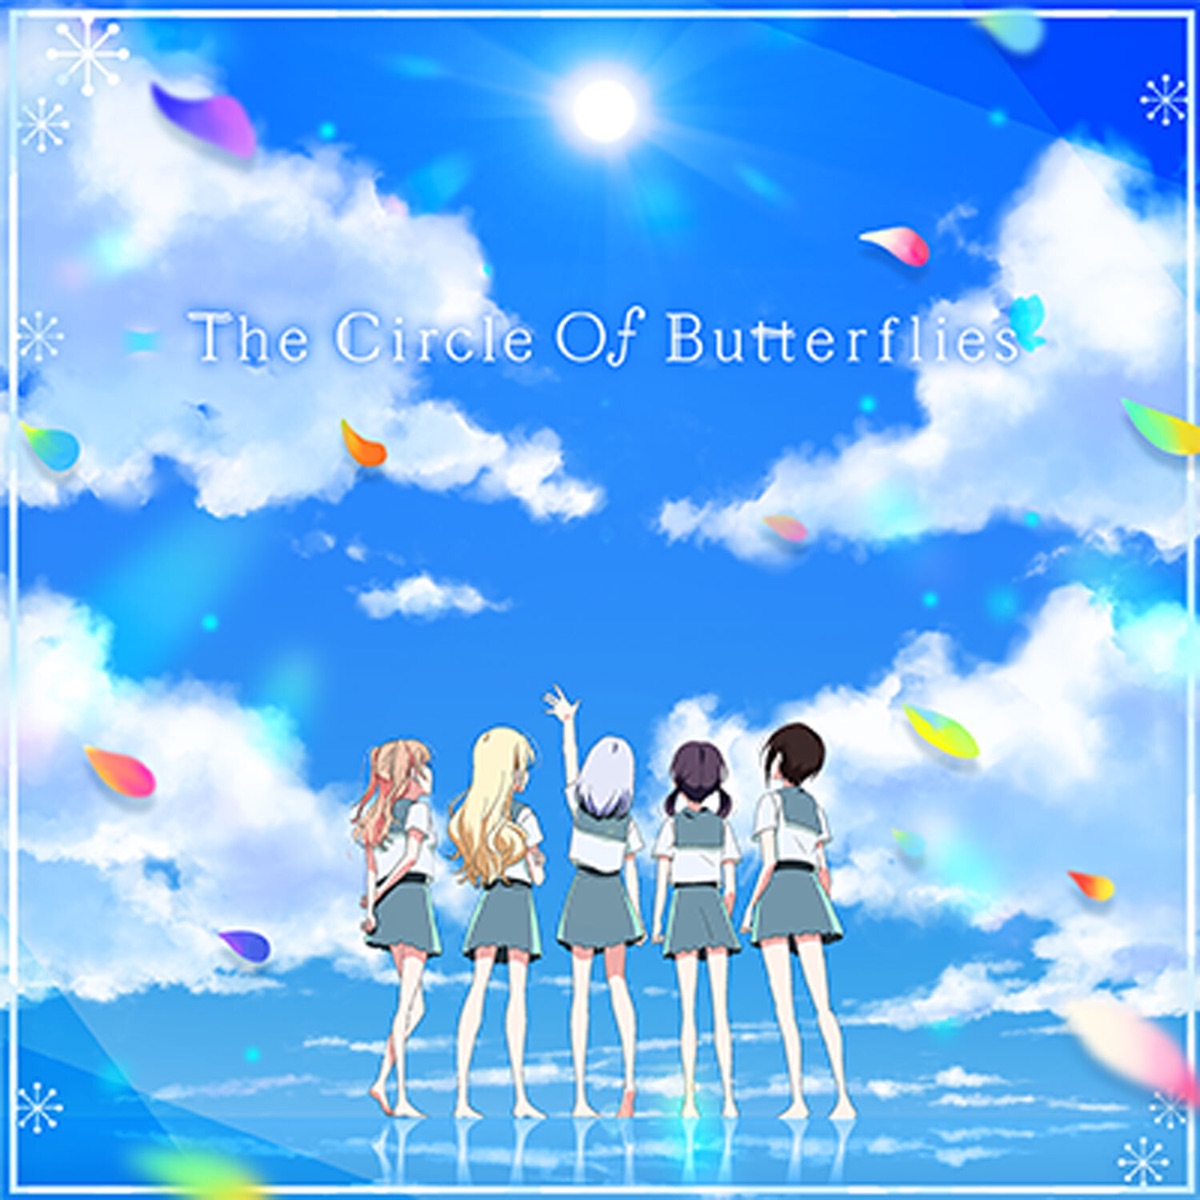 『Morfonica - The Circle Of Butterflies 歌詞』収録の『The Circle Of Butterflies』ジャケット